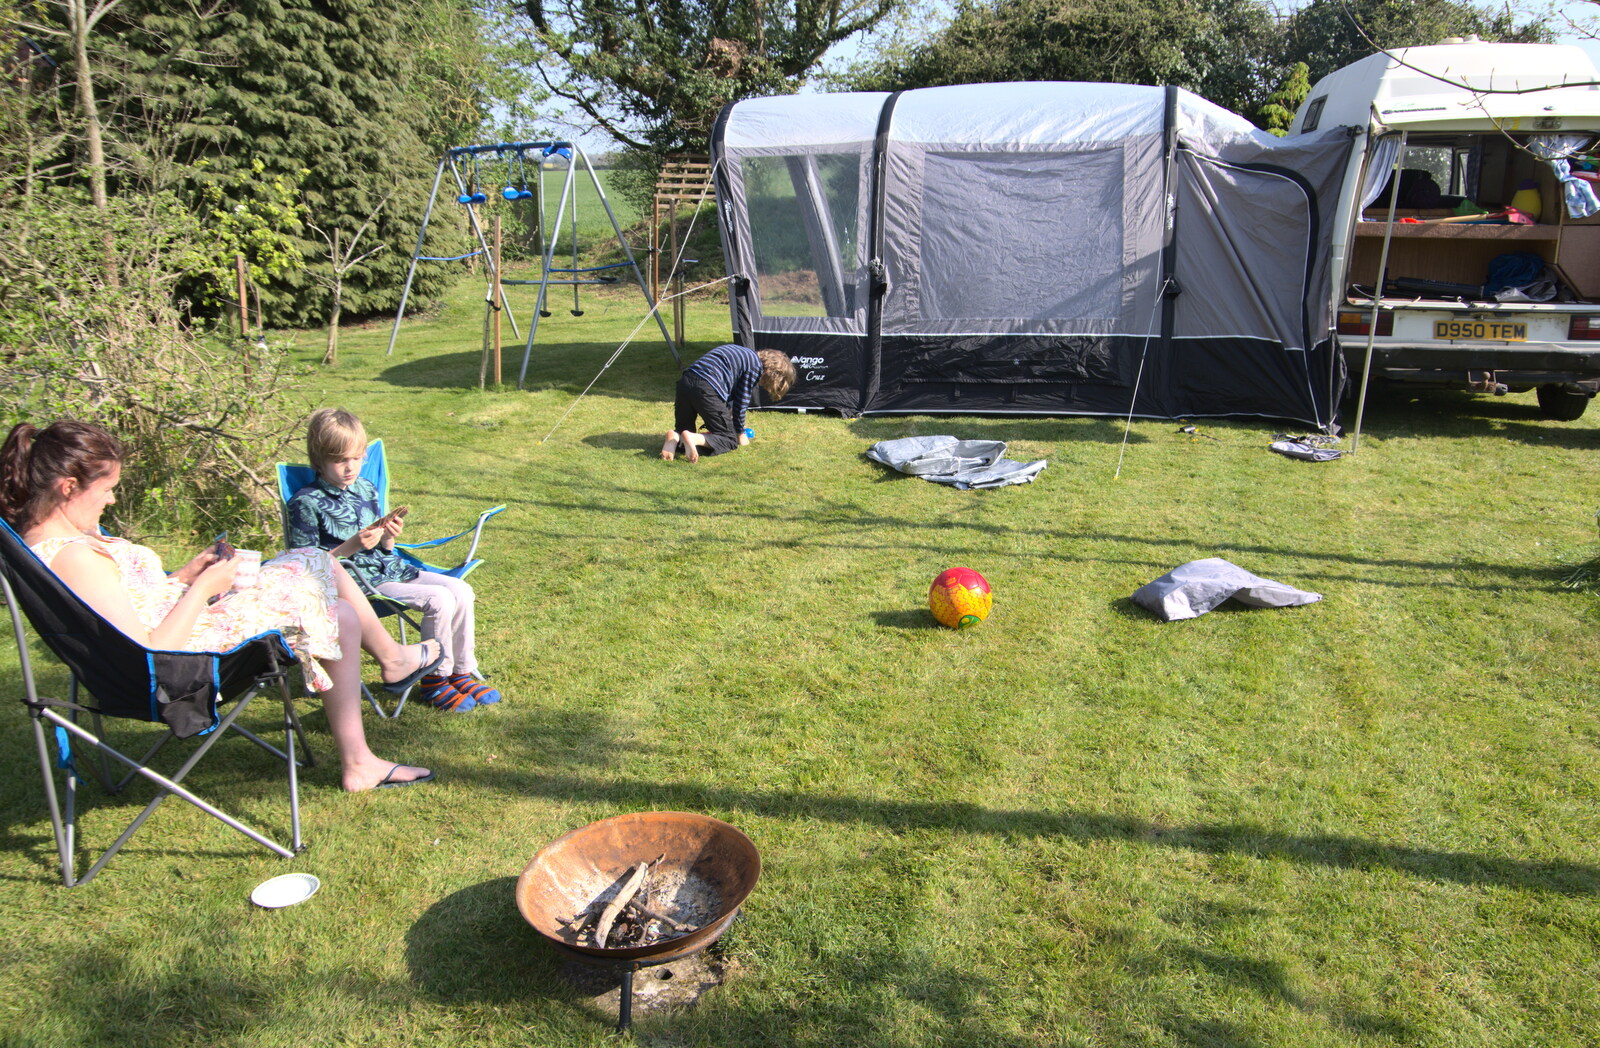 It's just like actual camping from A Weekend Camping Trip in the Garden, Brome, Suffolk - 11th April 2020